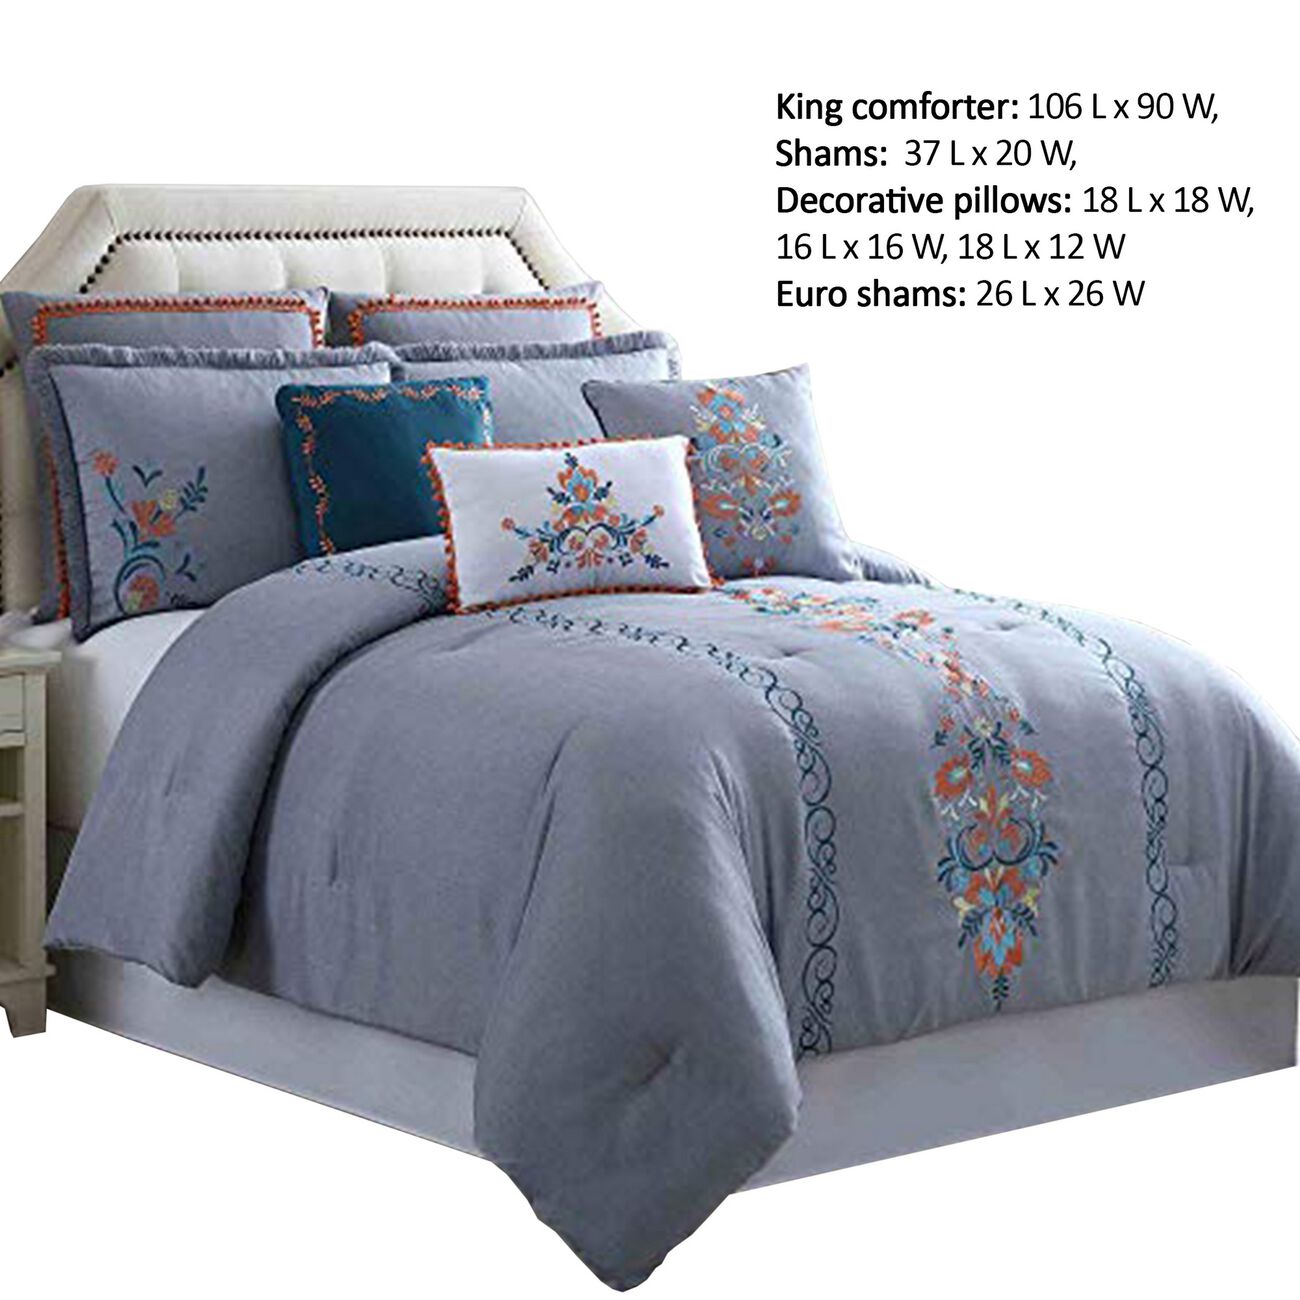 Odense 8 Piece King Comforter Set with Floral Embroidery The Urban Port, Multicolor